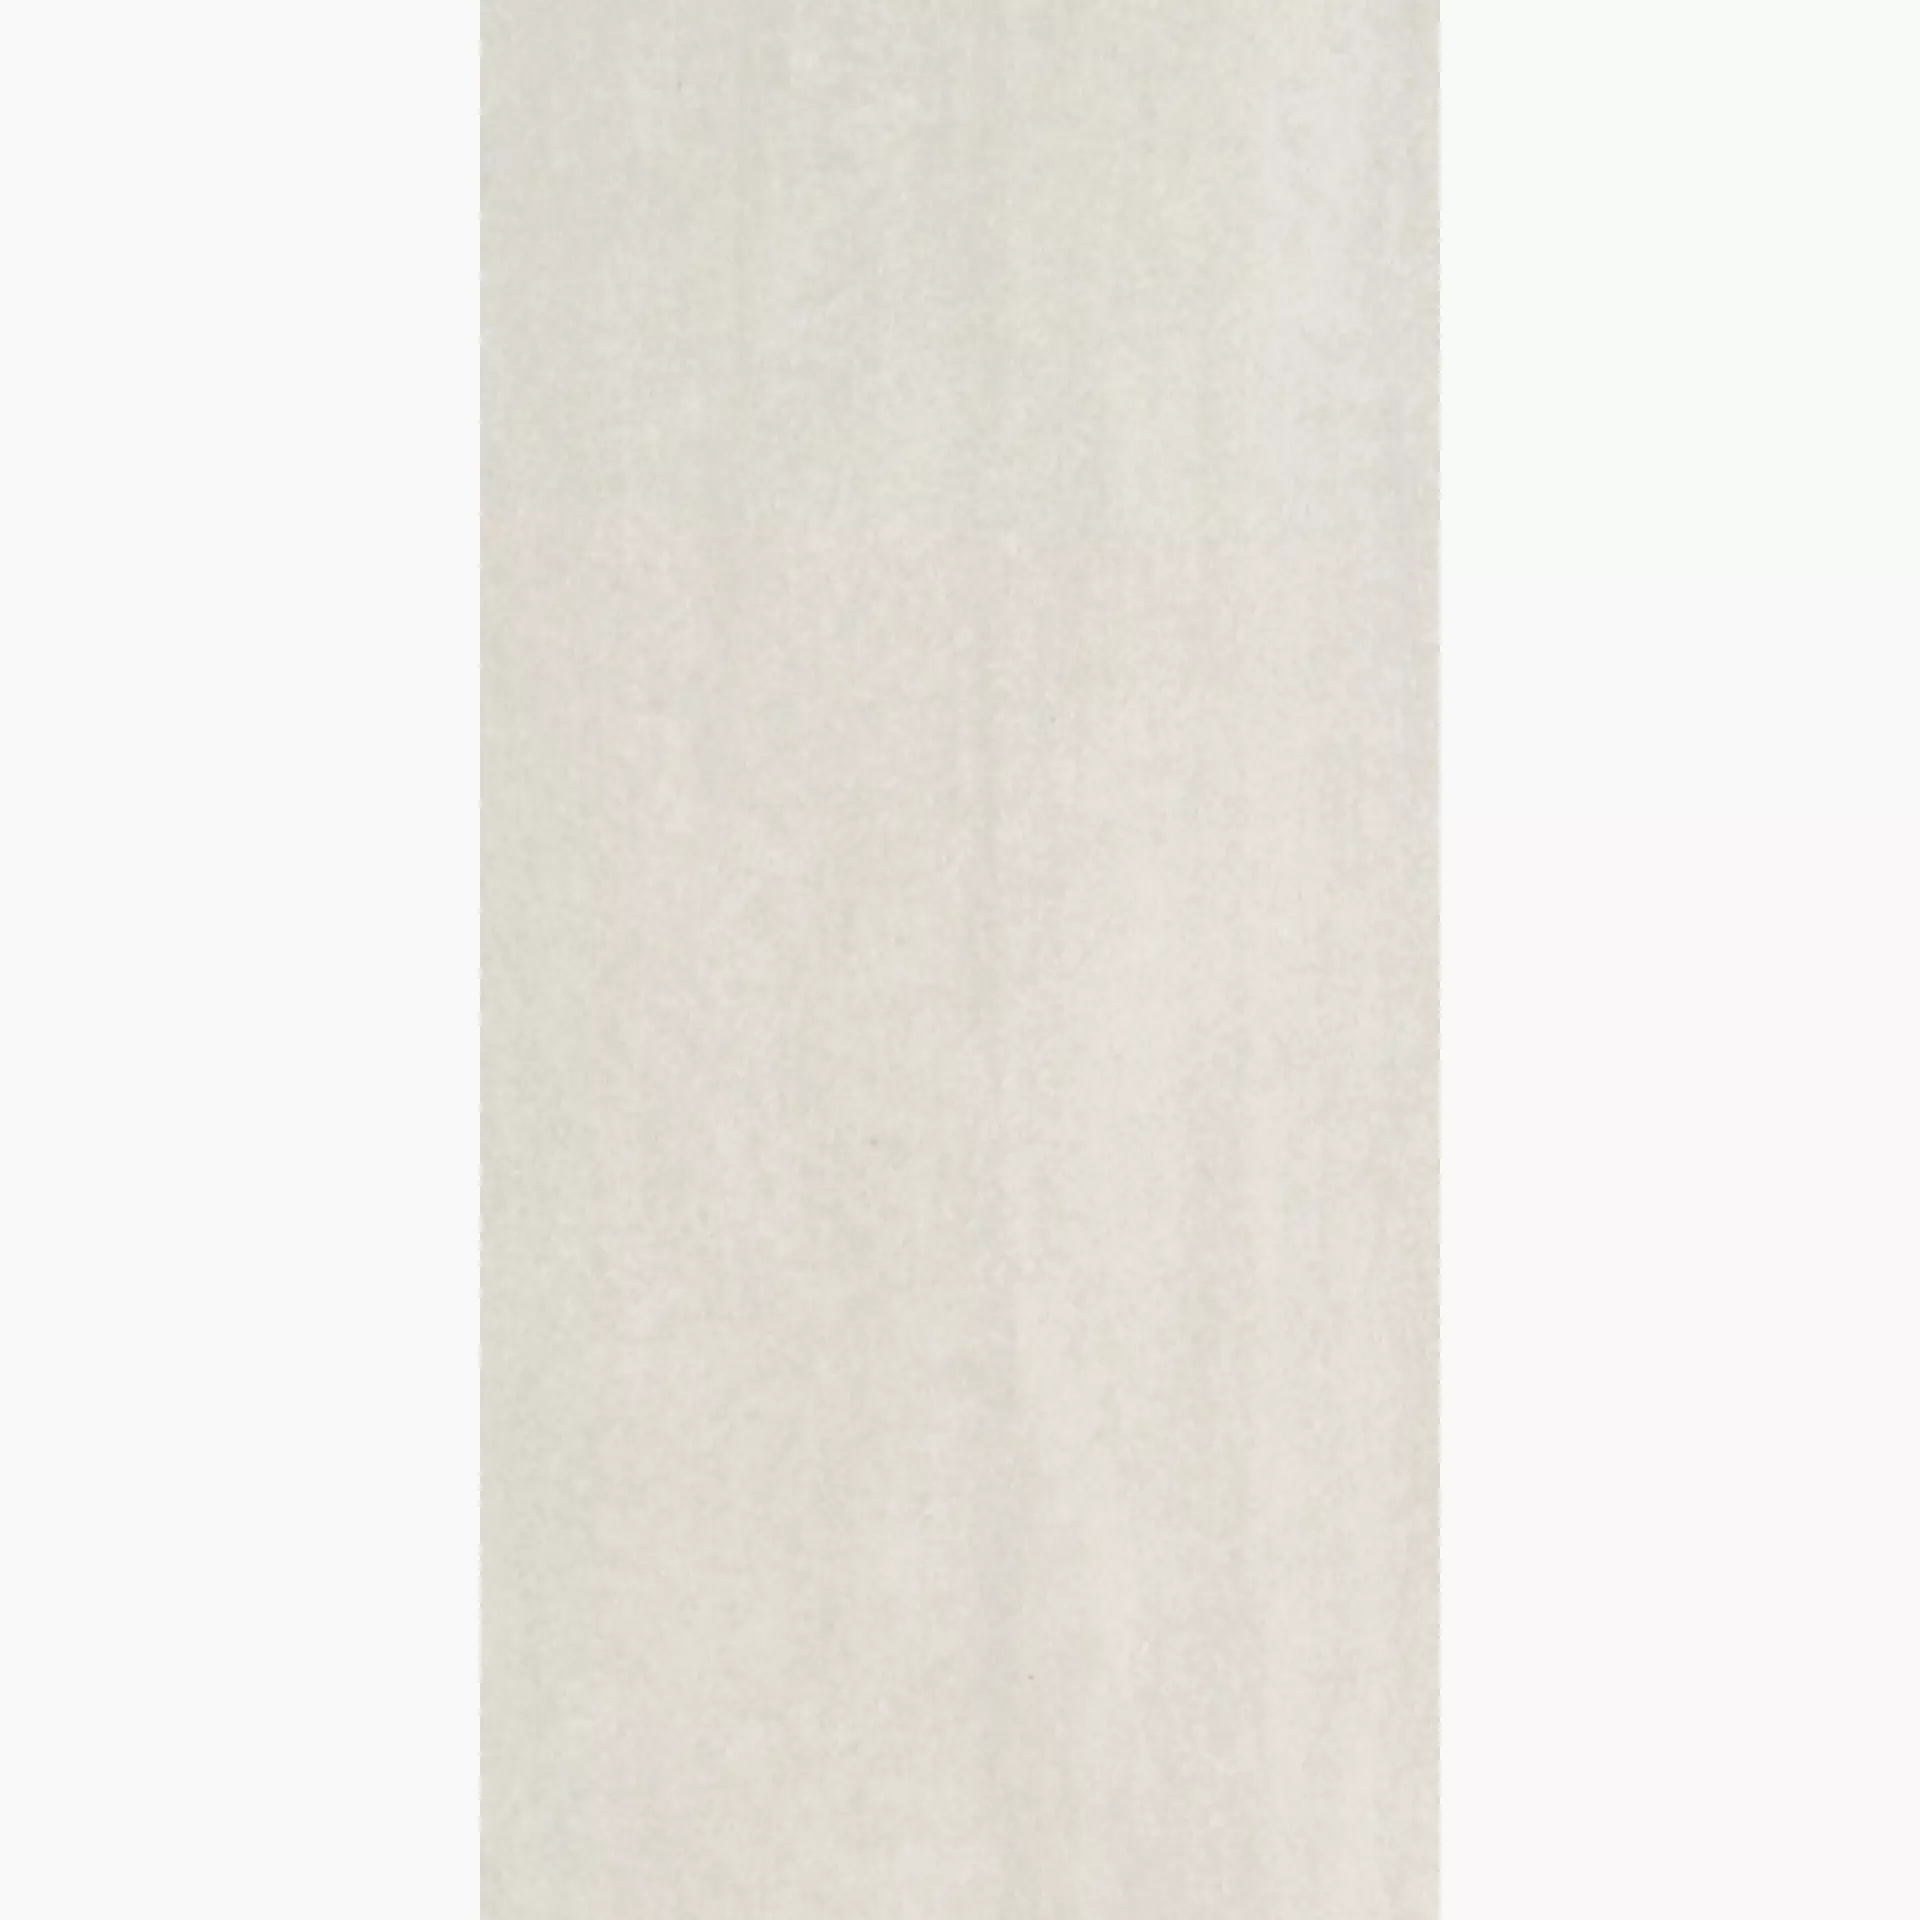 Rondine Contract Ivory Lappato J83762 30x60cm rectified 9,5mm